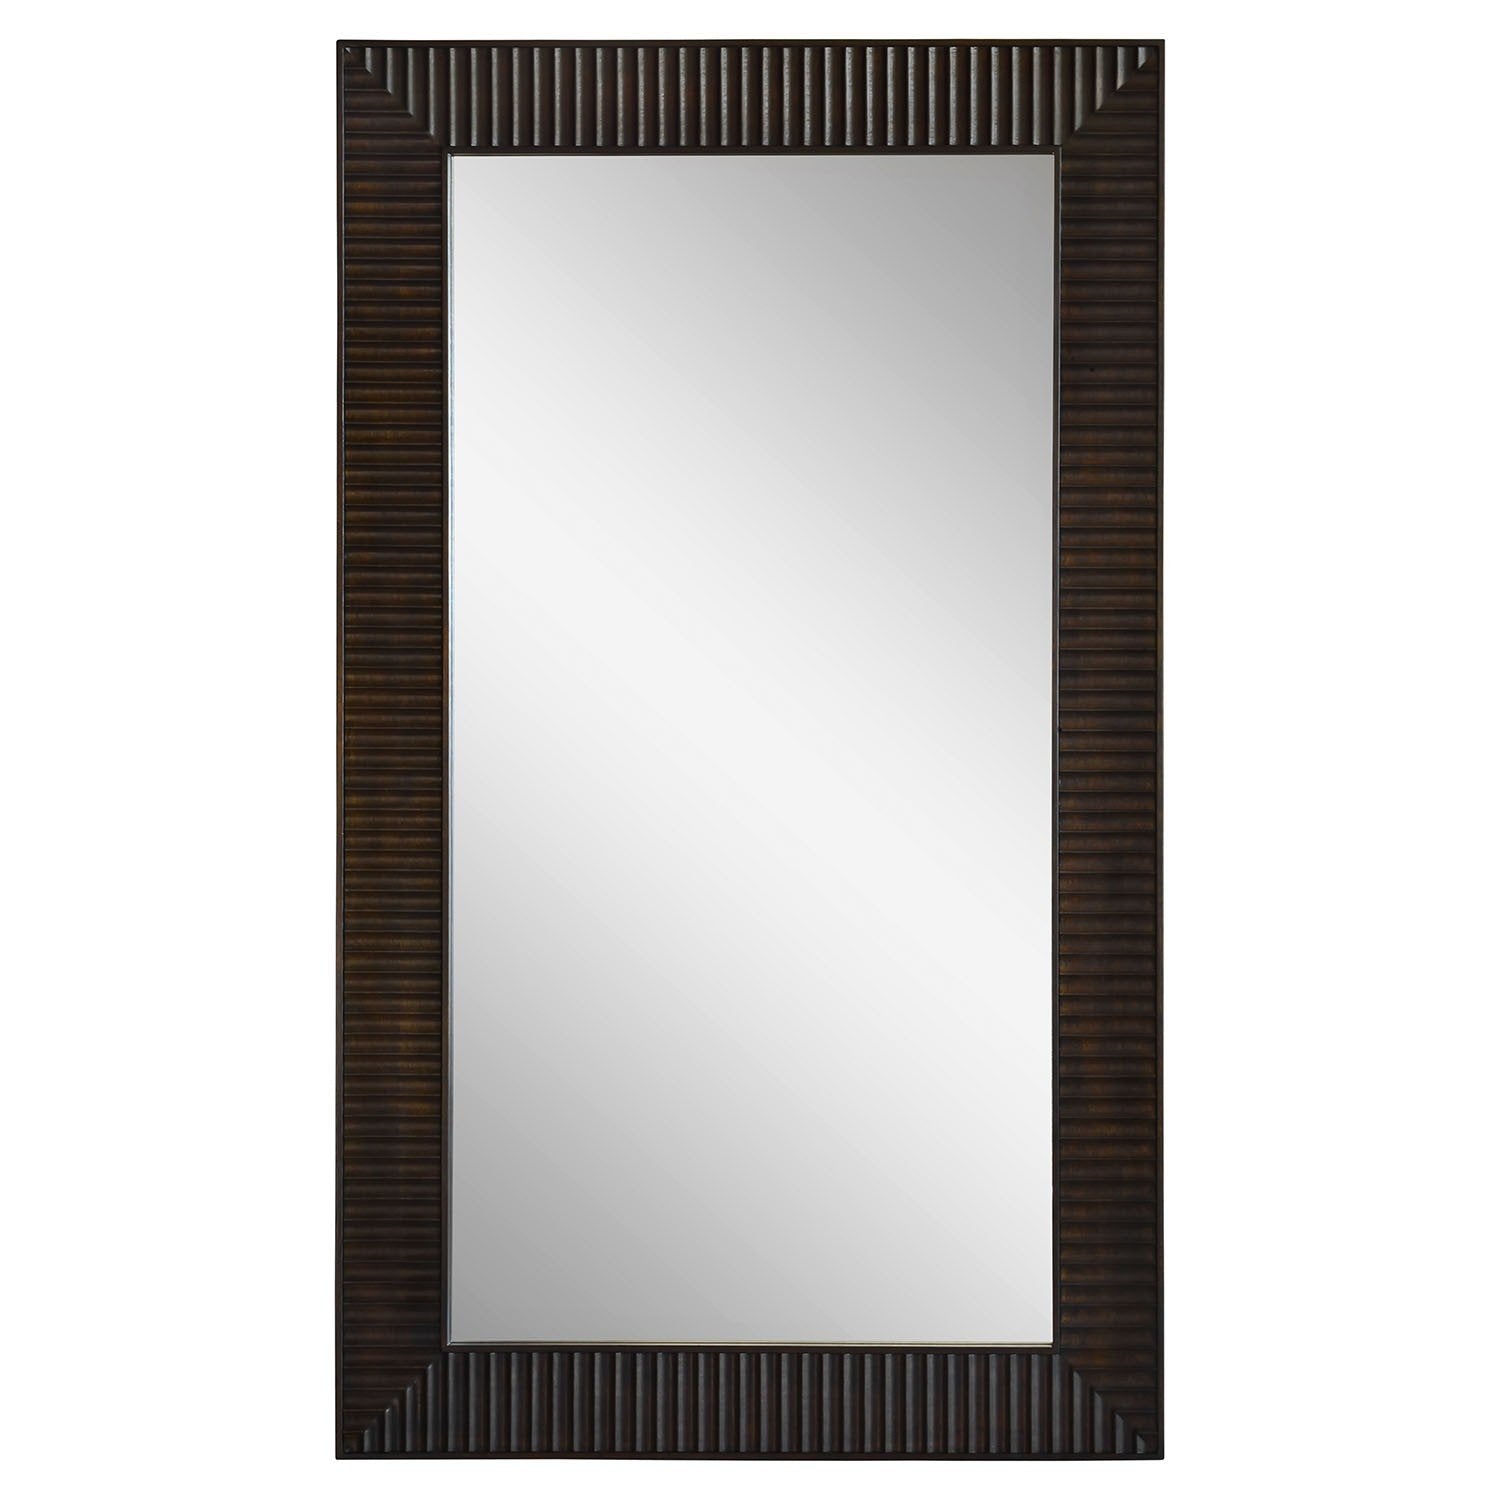 Mirror Image Home - Sheppard Toasted Mahogany Wall Mirror by Jamie Drake | Fig Linens